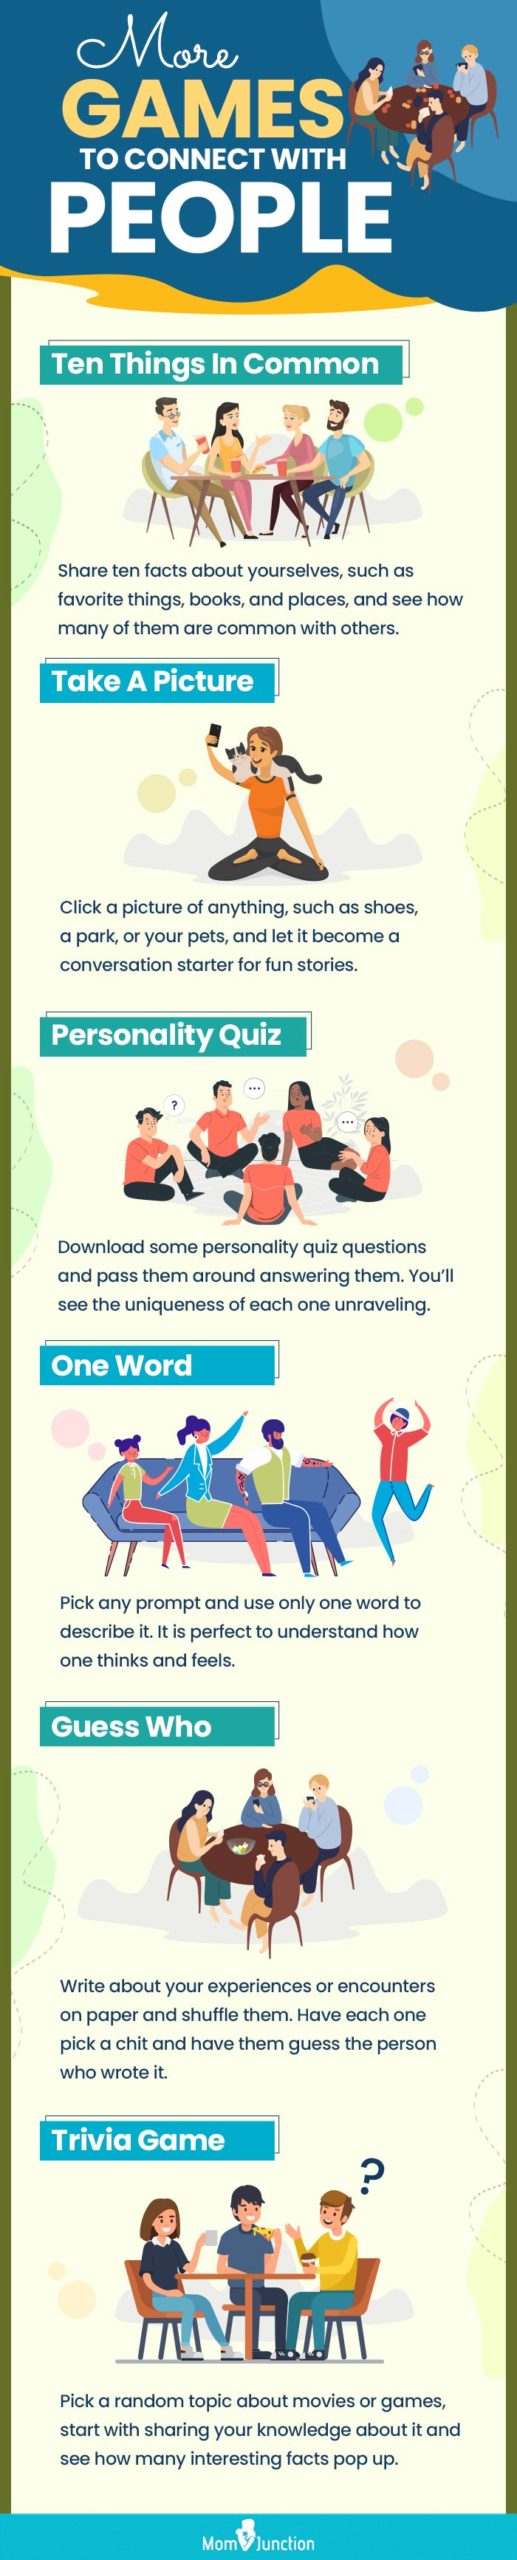 more games to connect with people (infographic)